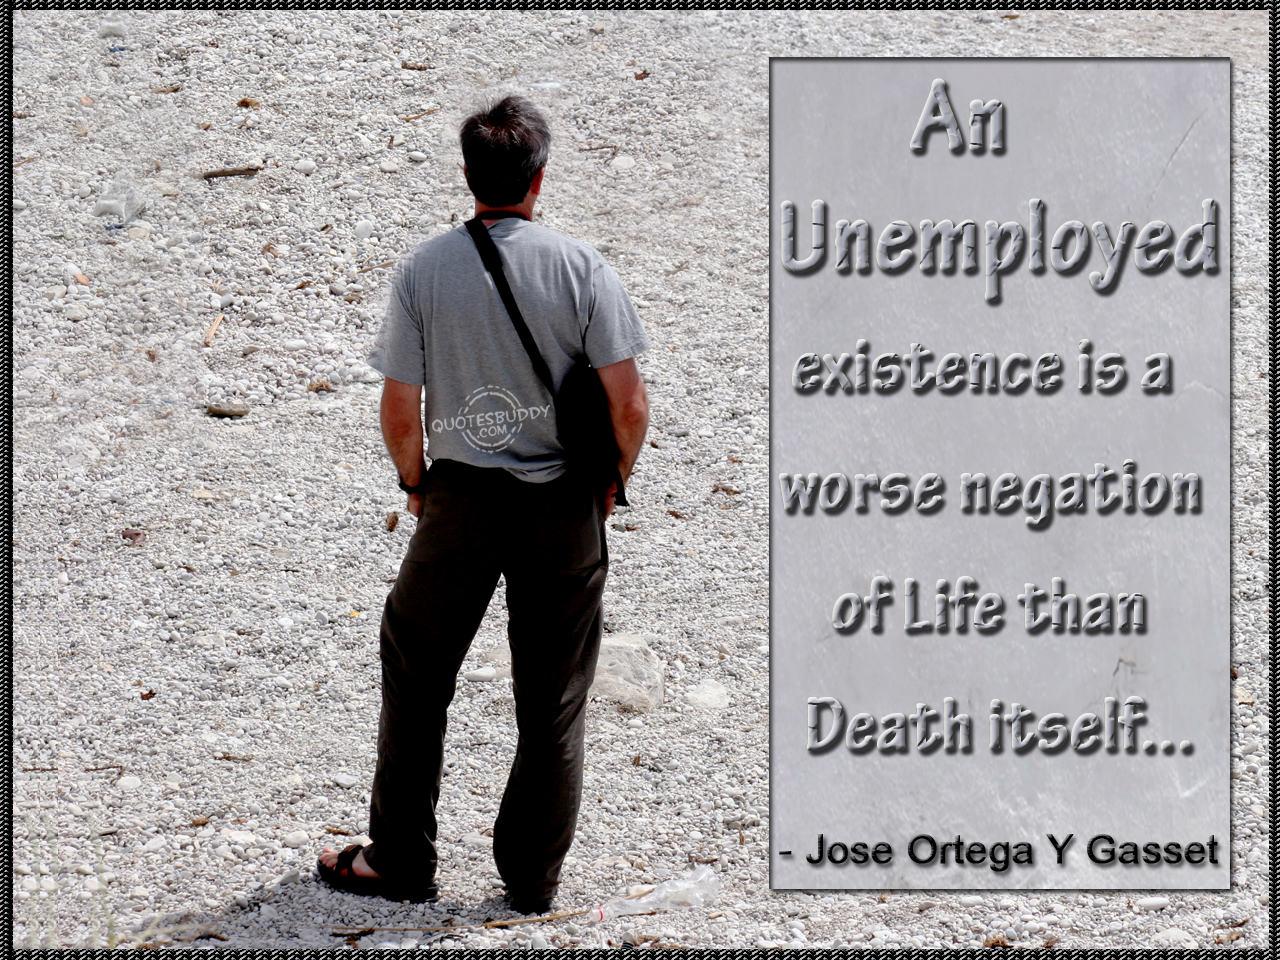 An 'unemployed' existence is a worse negation of life than death itself - Jose Ortega y Gasset